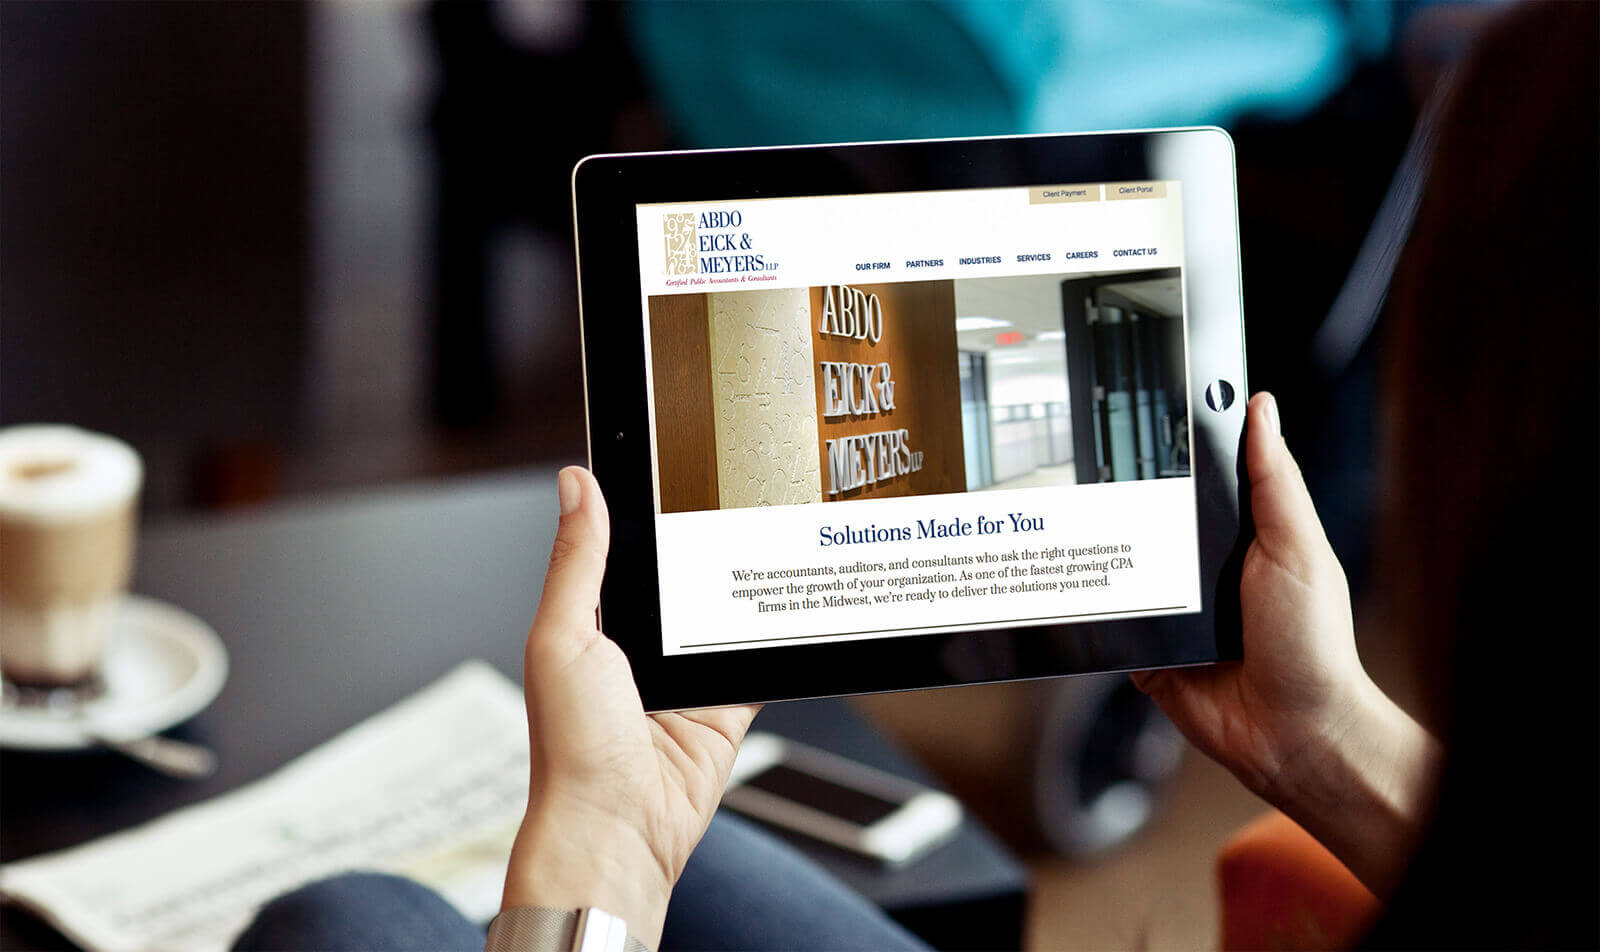 Website for Abdo Eick & Meyers being viewed on a tablet